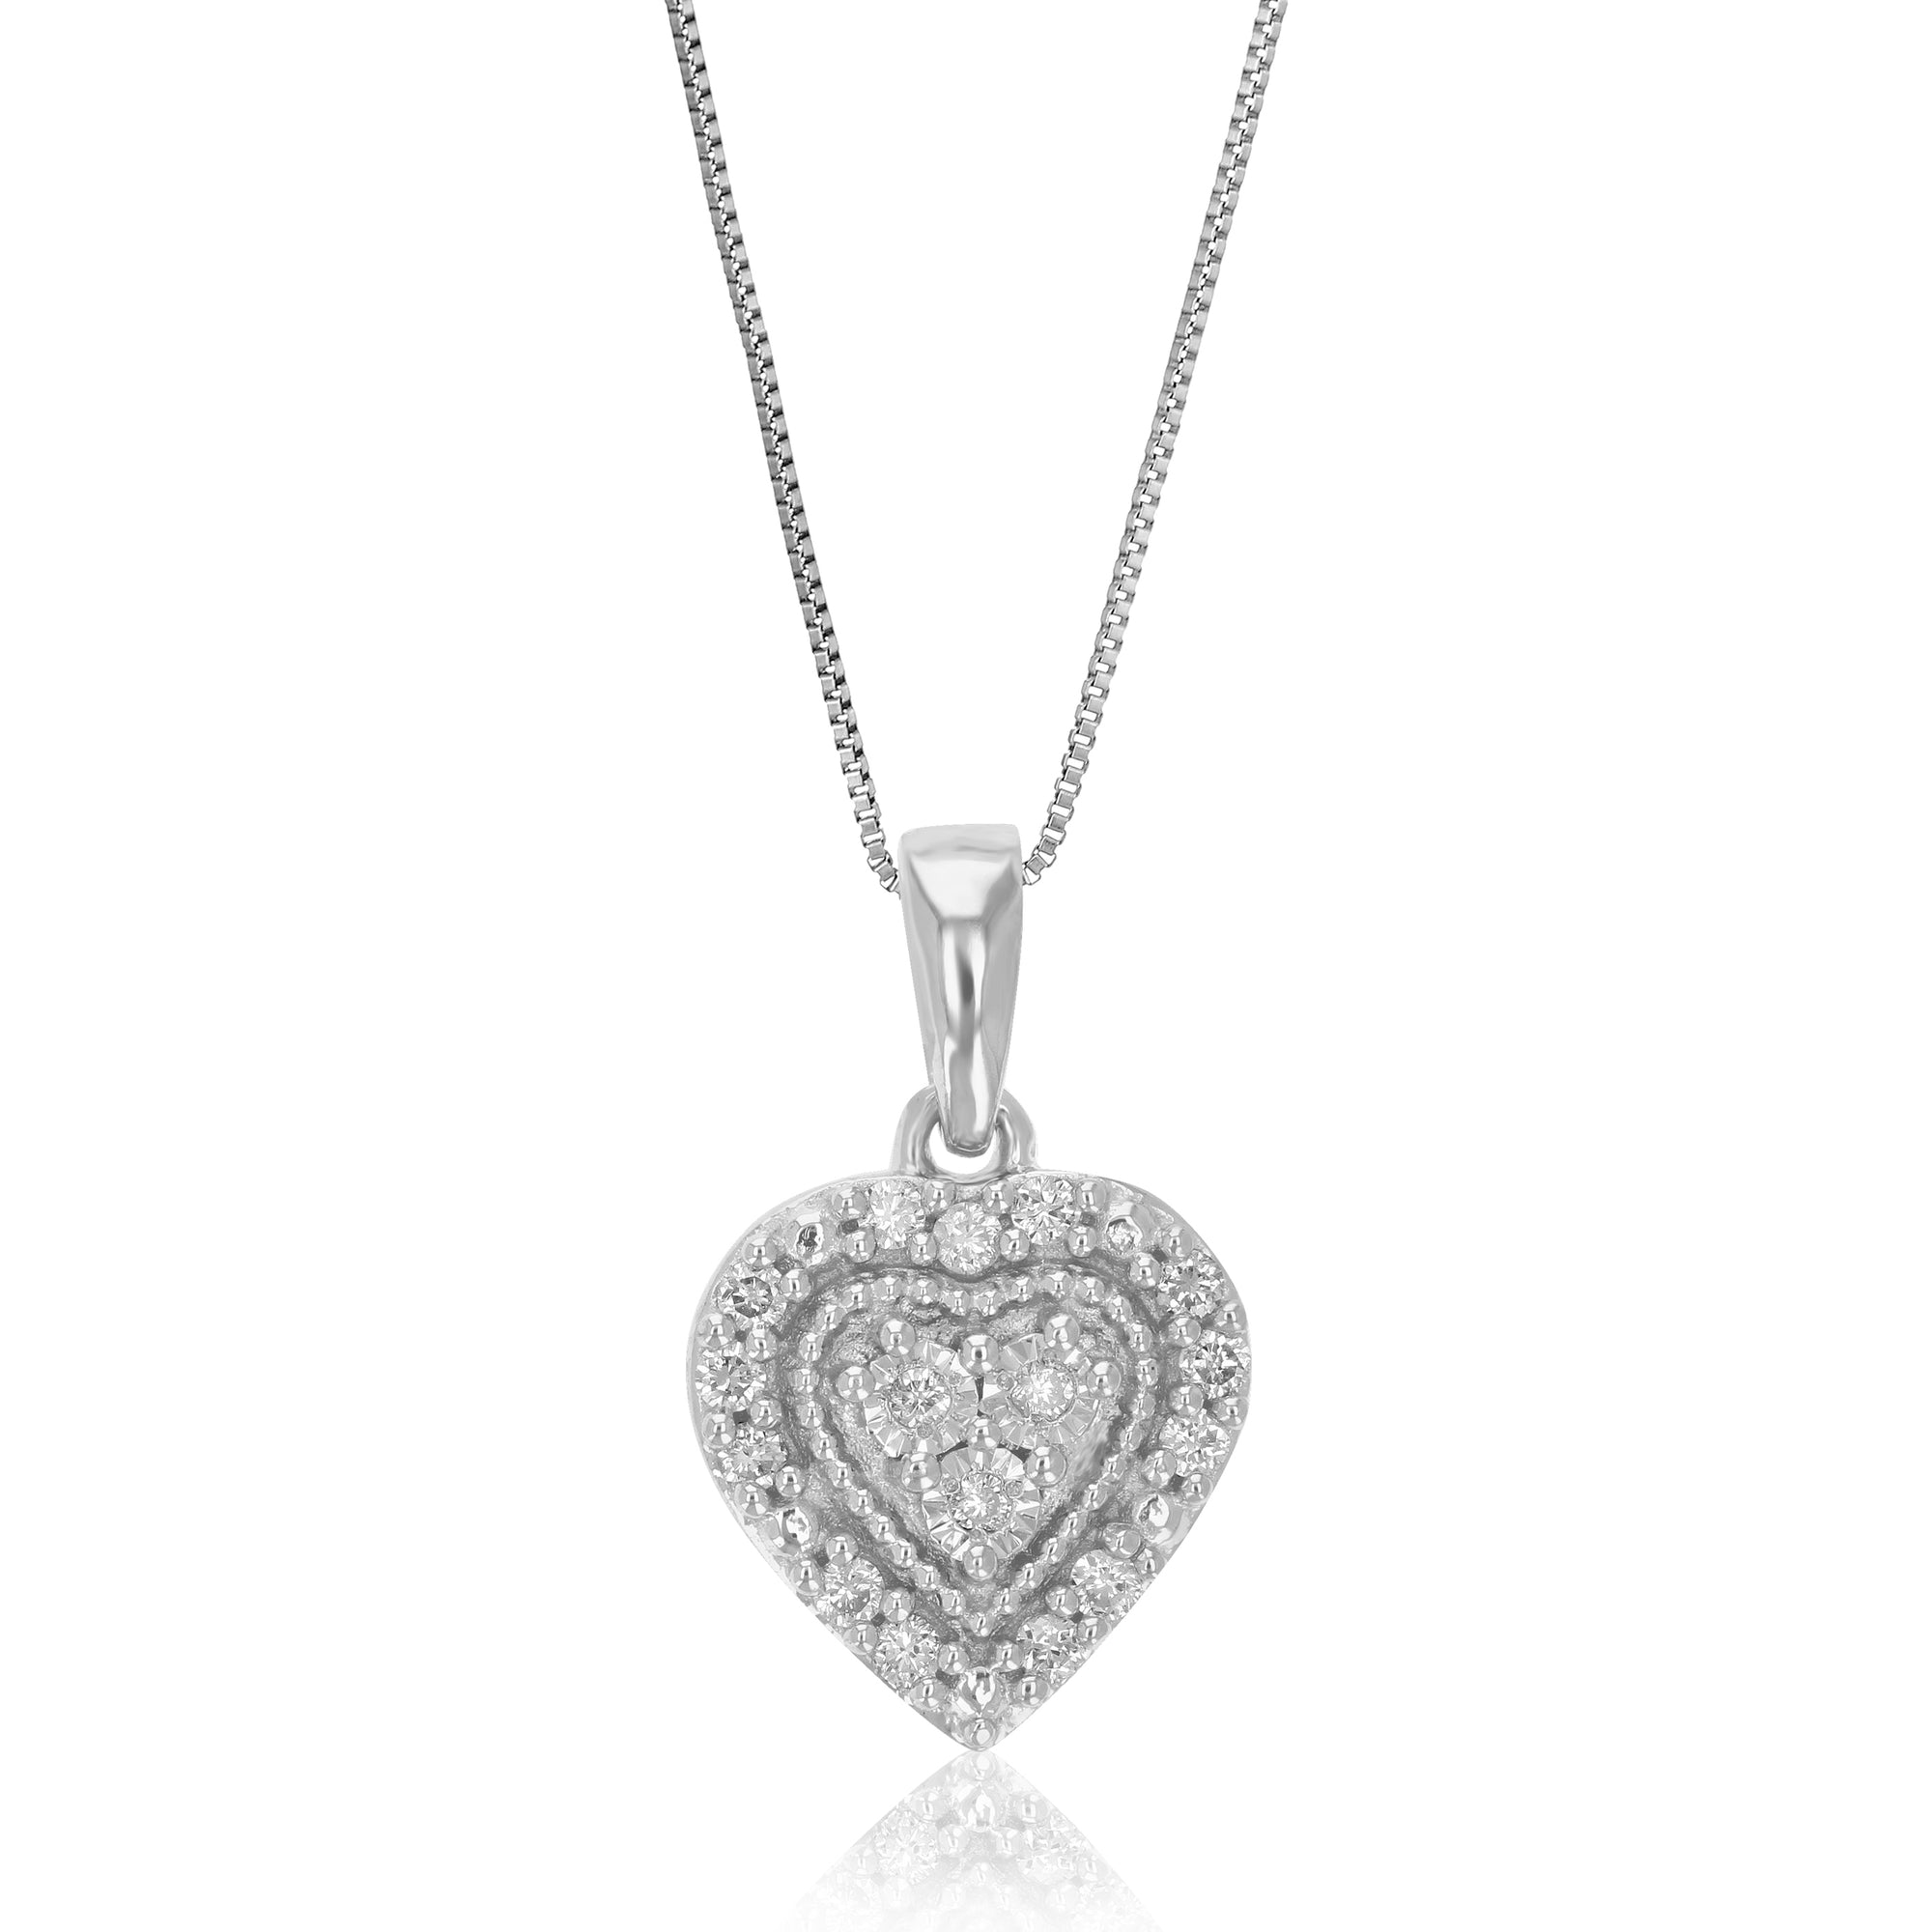 1/10 cttw Diamond Pendant Necklace for Women, Lab Grown Diamond Heart Pendant Necklace in .925 Sterling Silver with Chain, Size 1/2 Inch